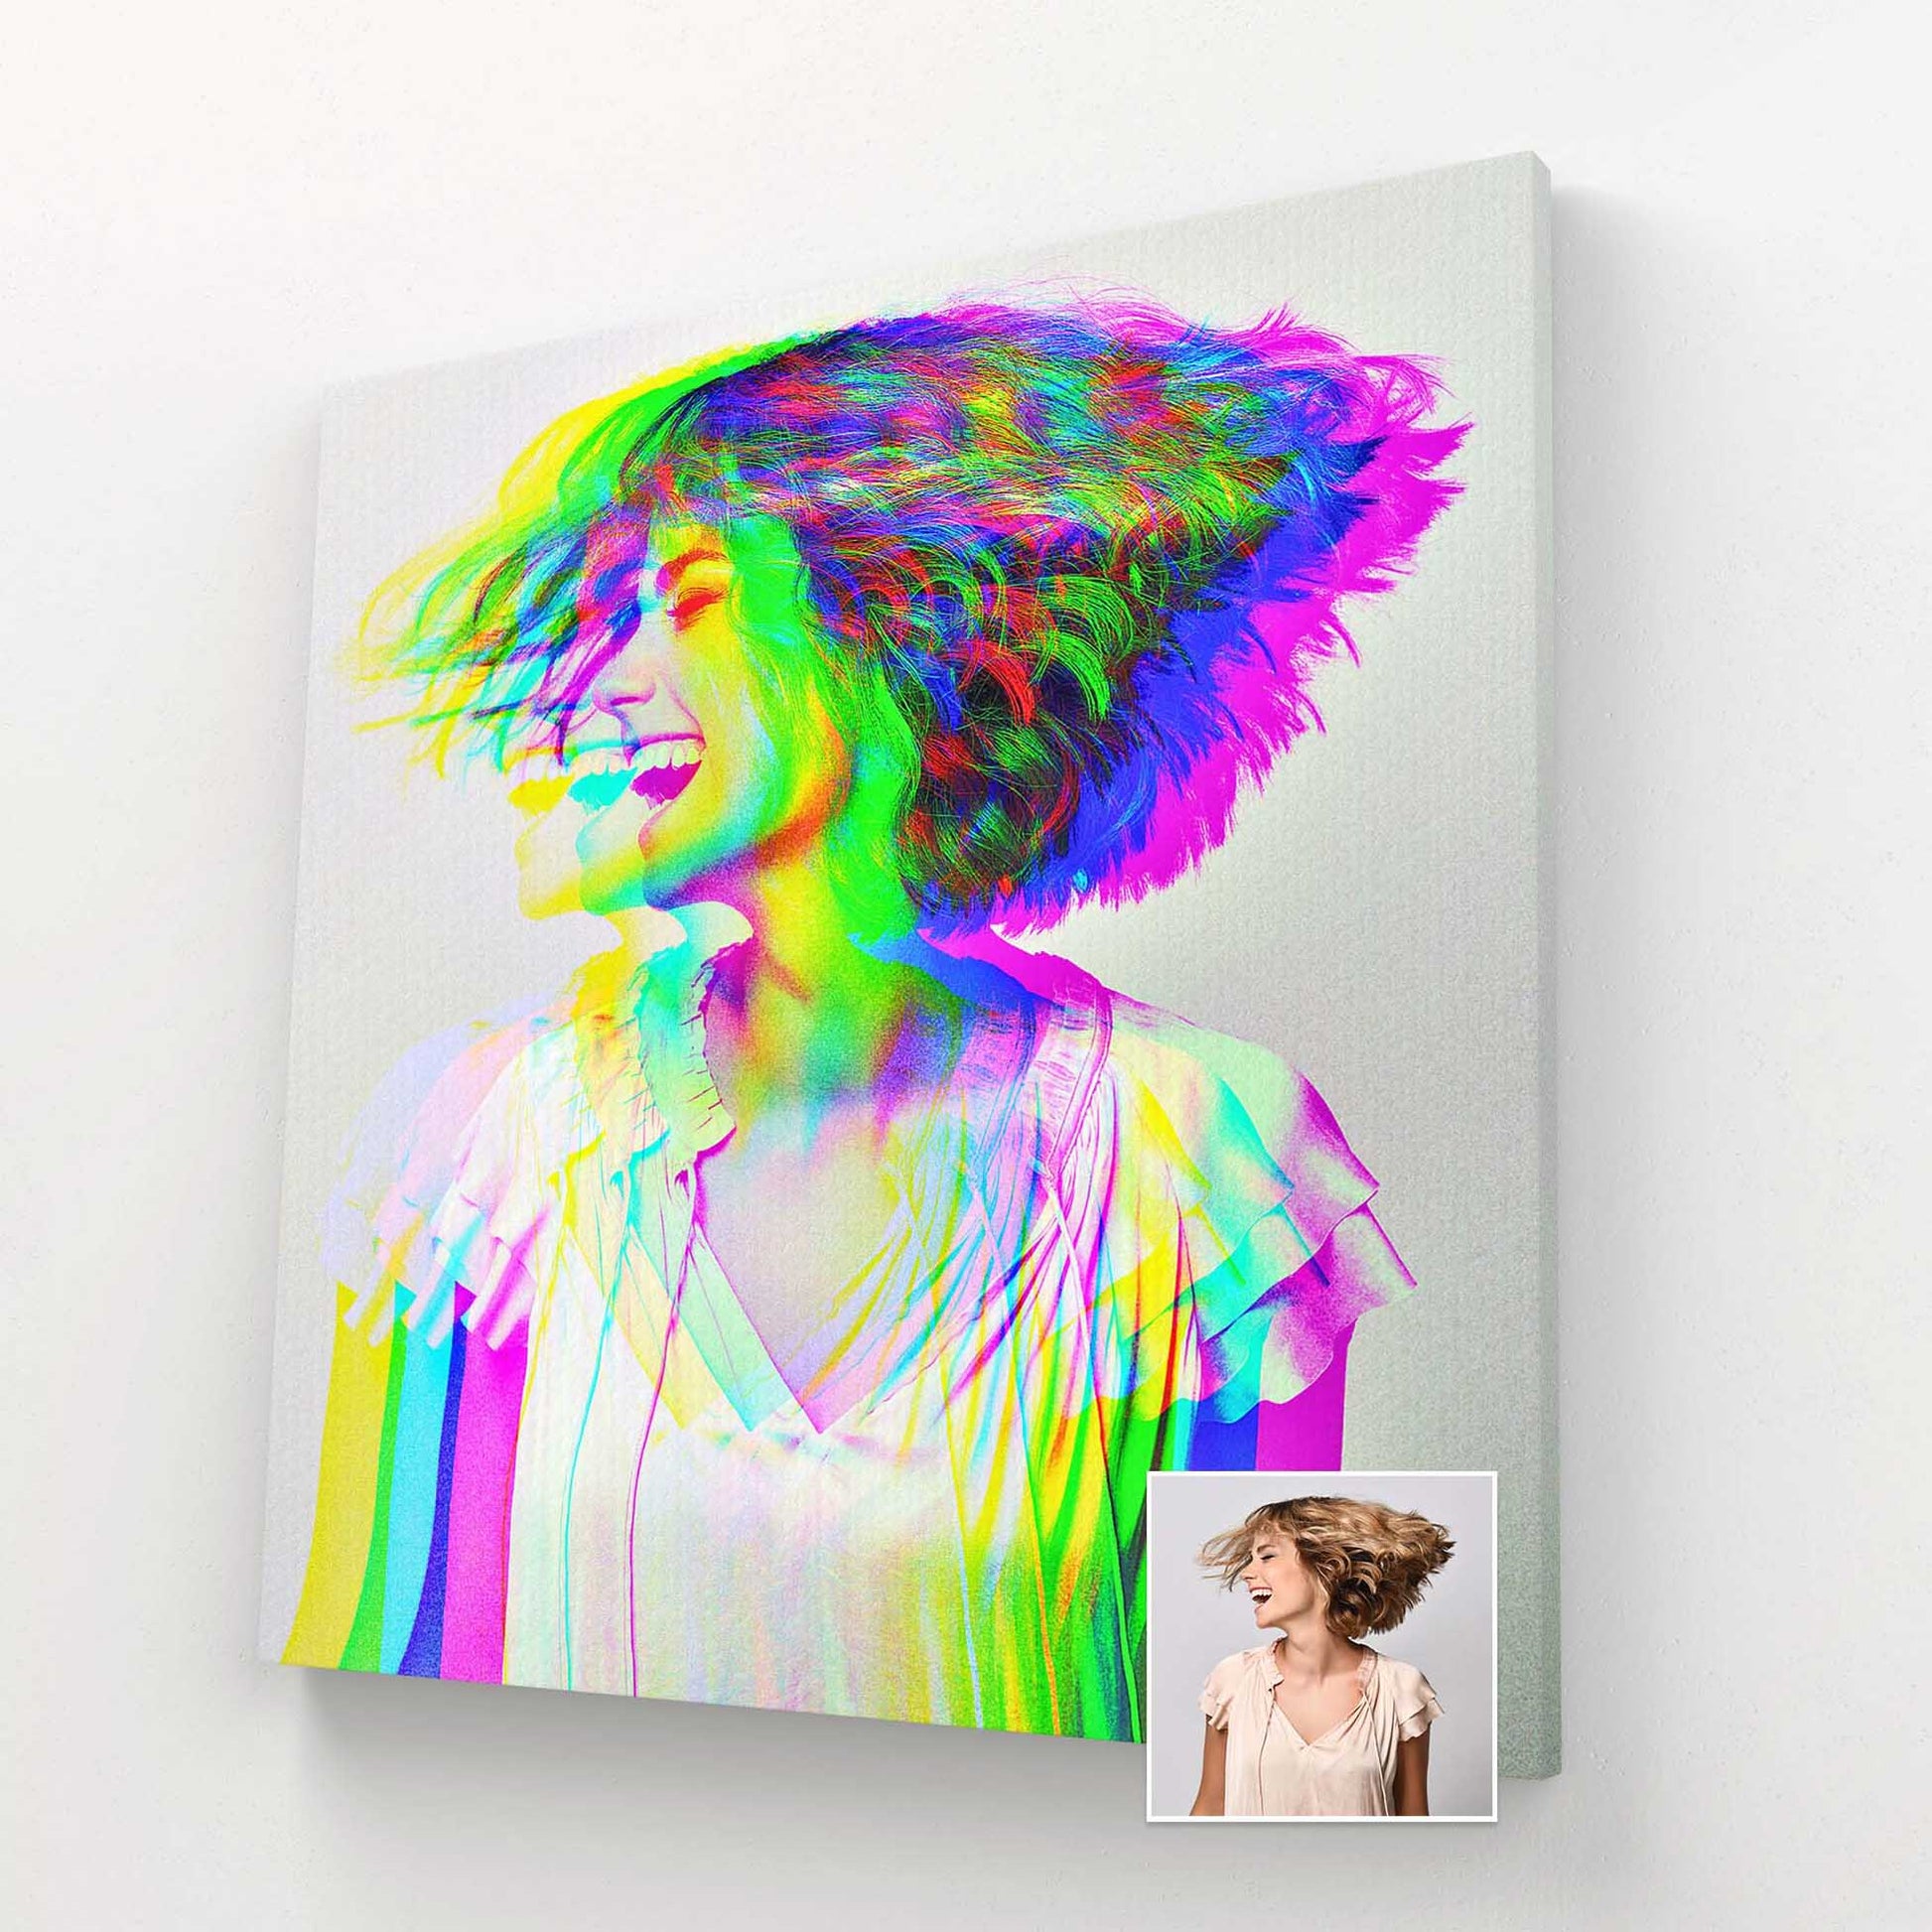 Elevate your wall art game with our personalised anaglyph 3D canvases